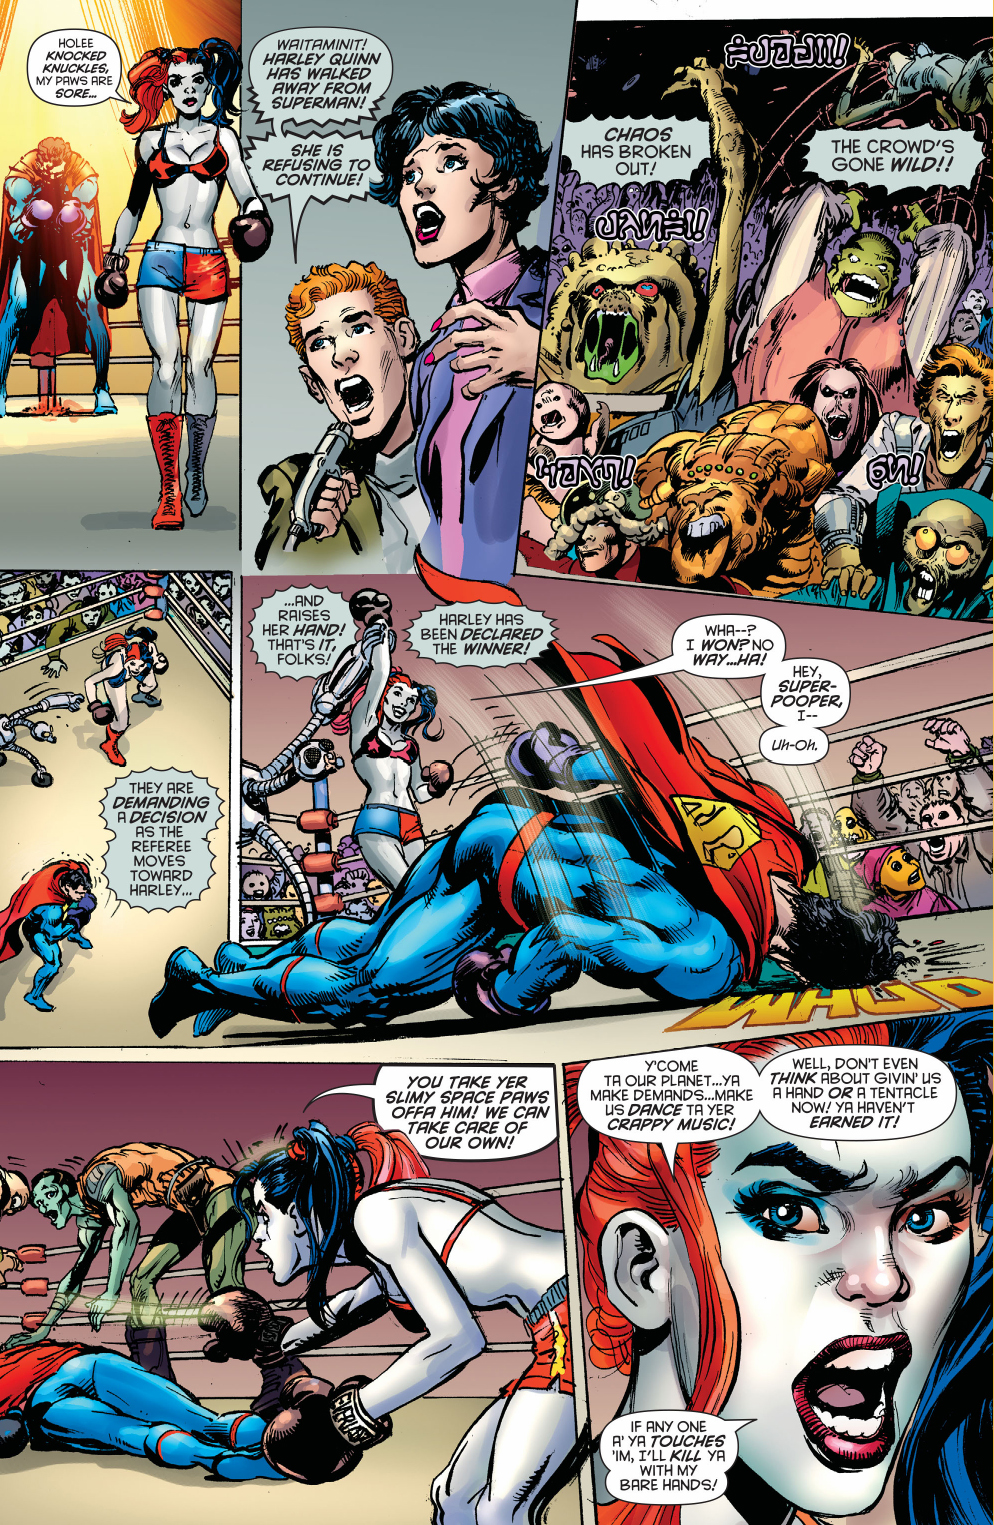 harley-quinn-vs-superman-in-a-boxing-match